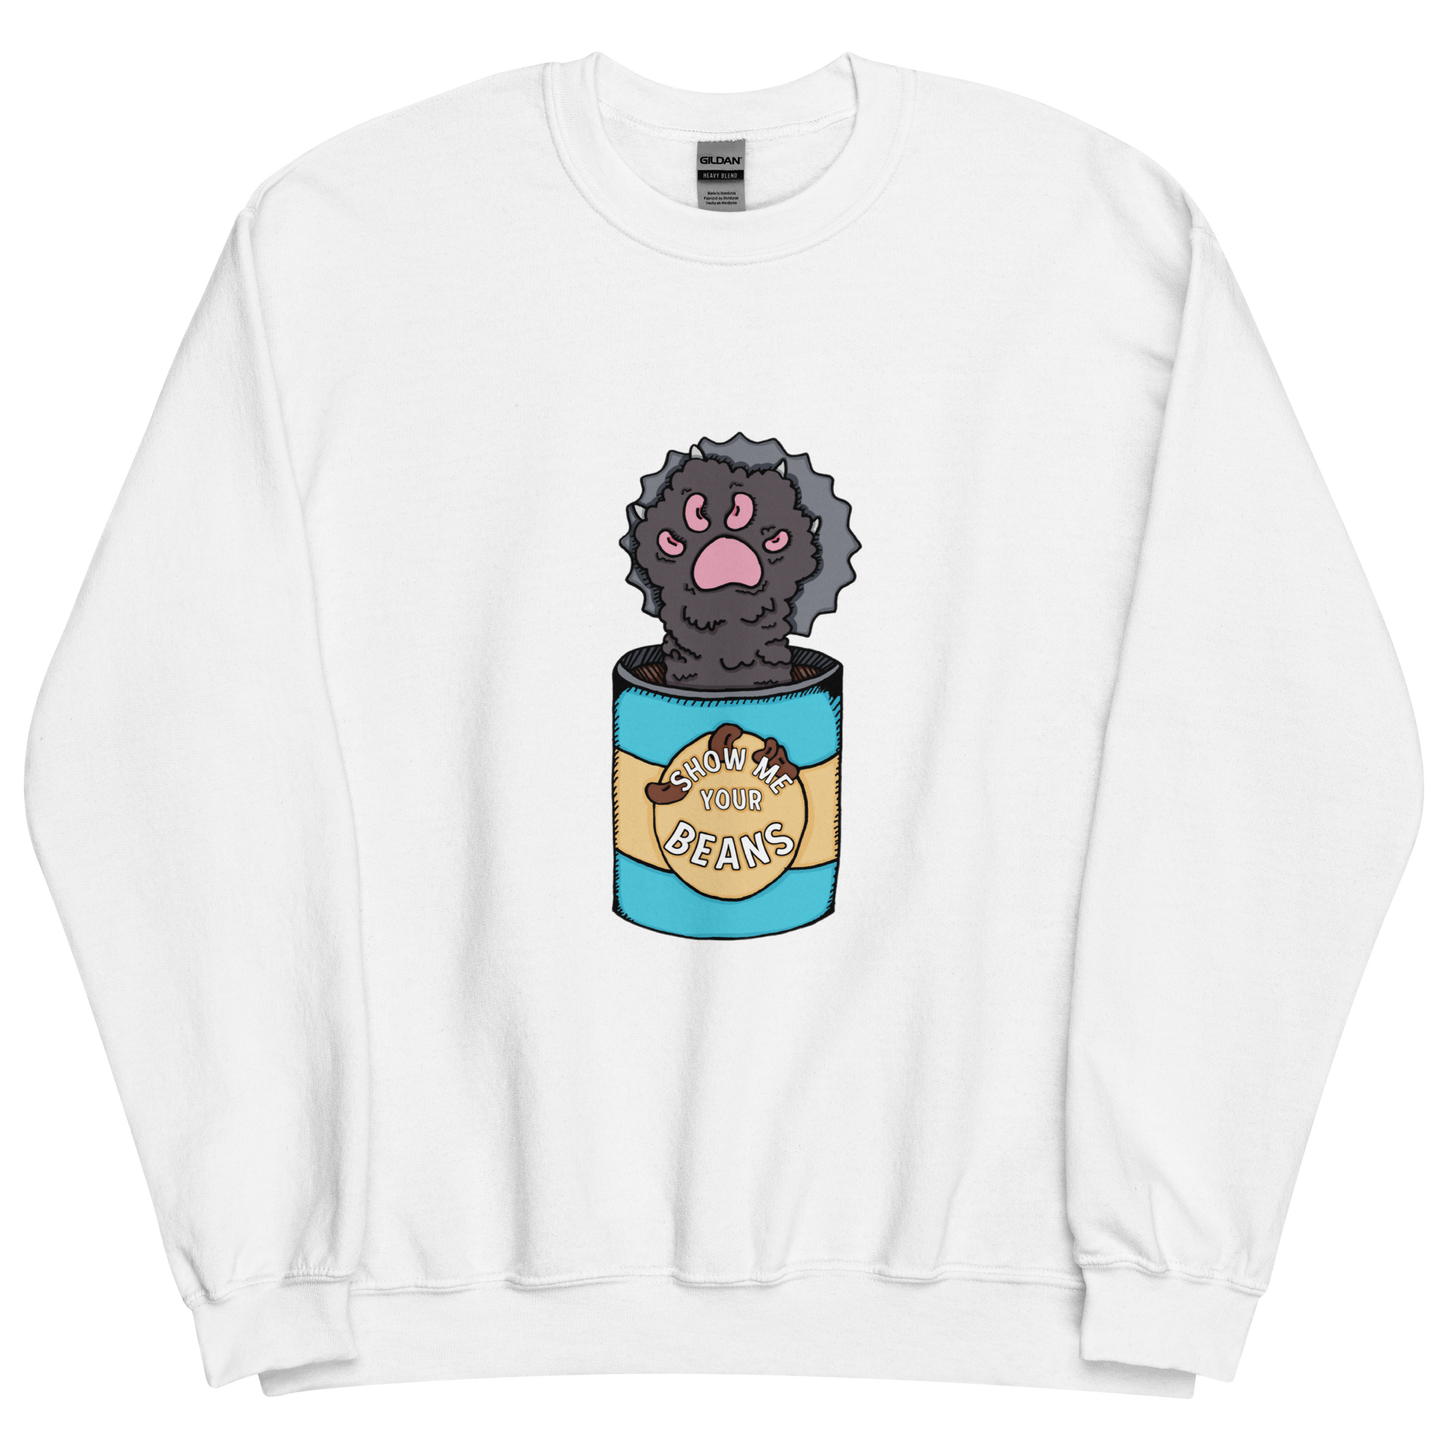 show me your beans sweatshirt in white - gaslit apparel